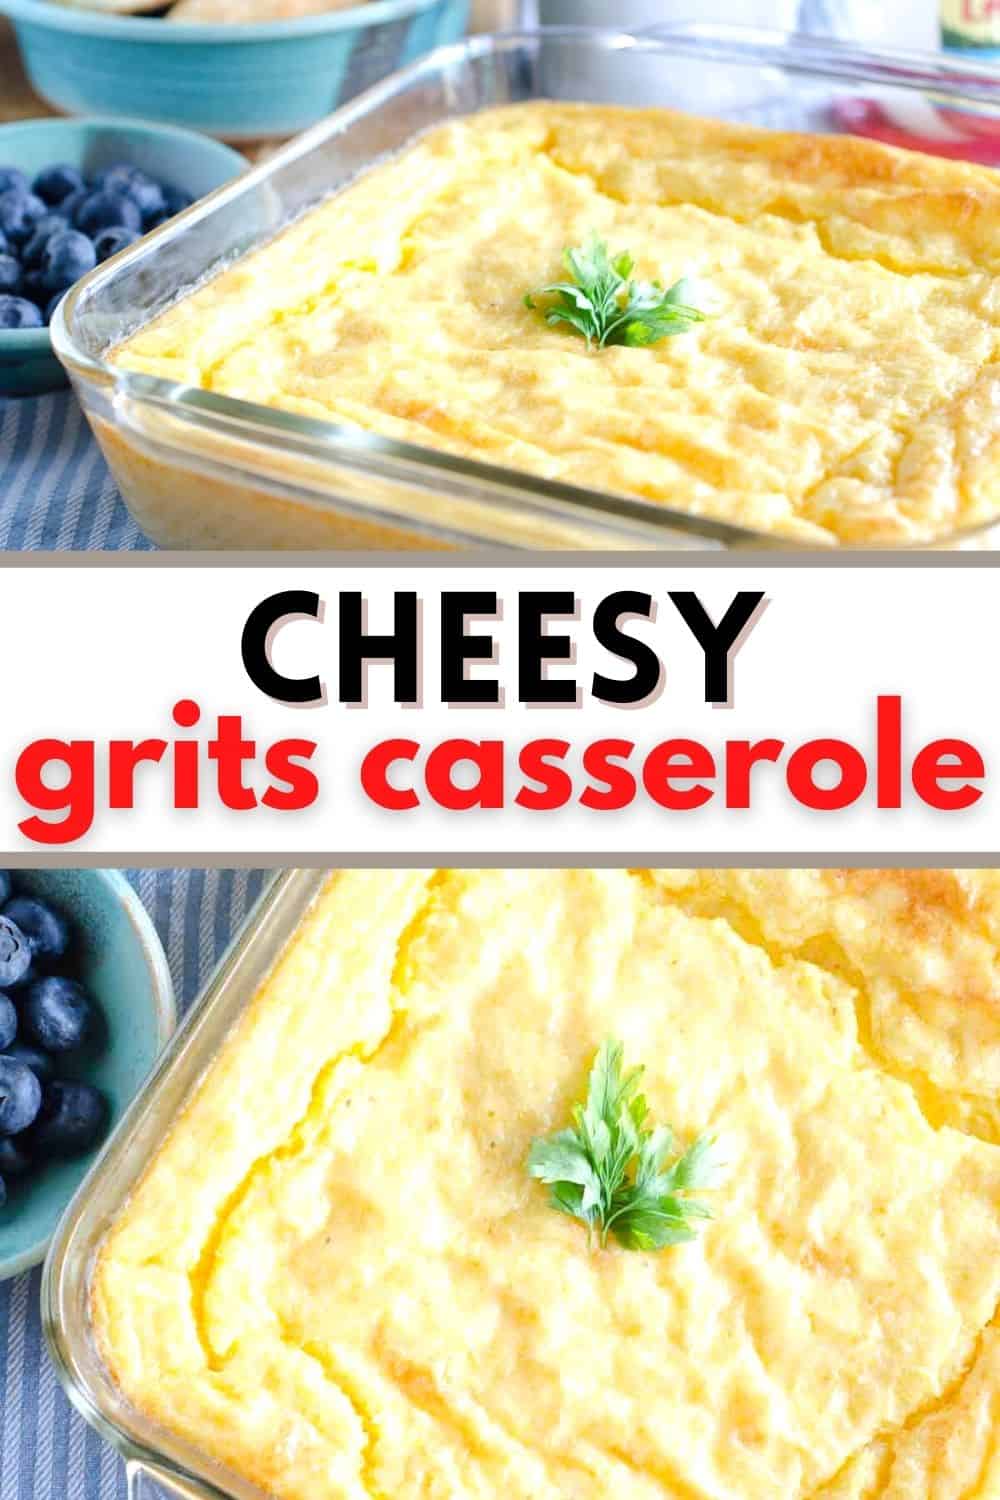 Every home cook needs a baked cheese grits casserole recipe in their collection.  This one is mine and it is SO GOOD!  These cheesy grits are great with breakfast or ANY meal!